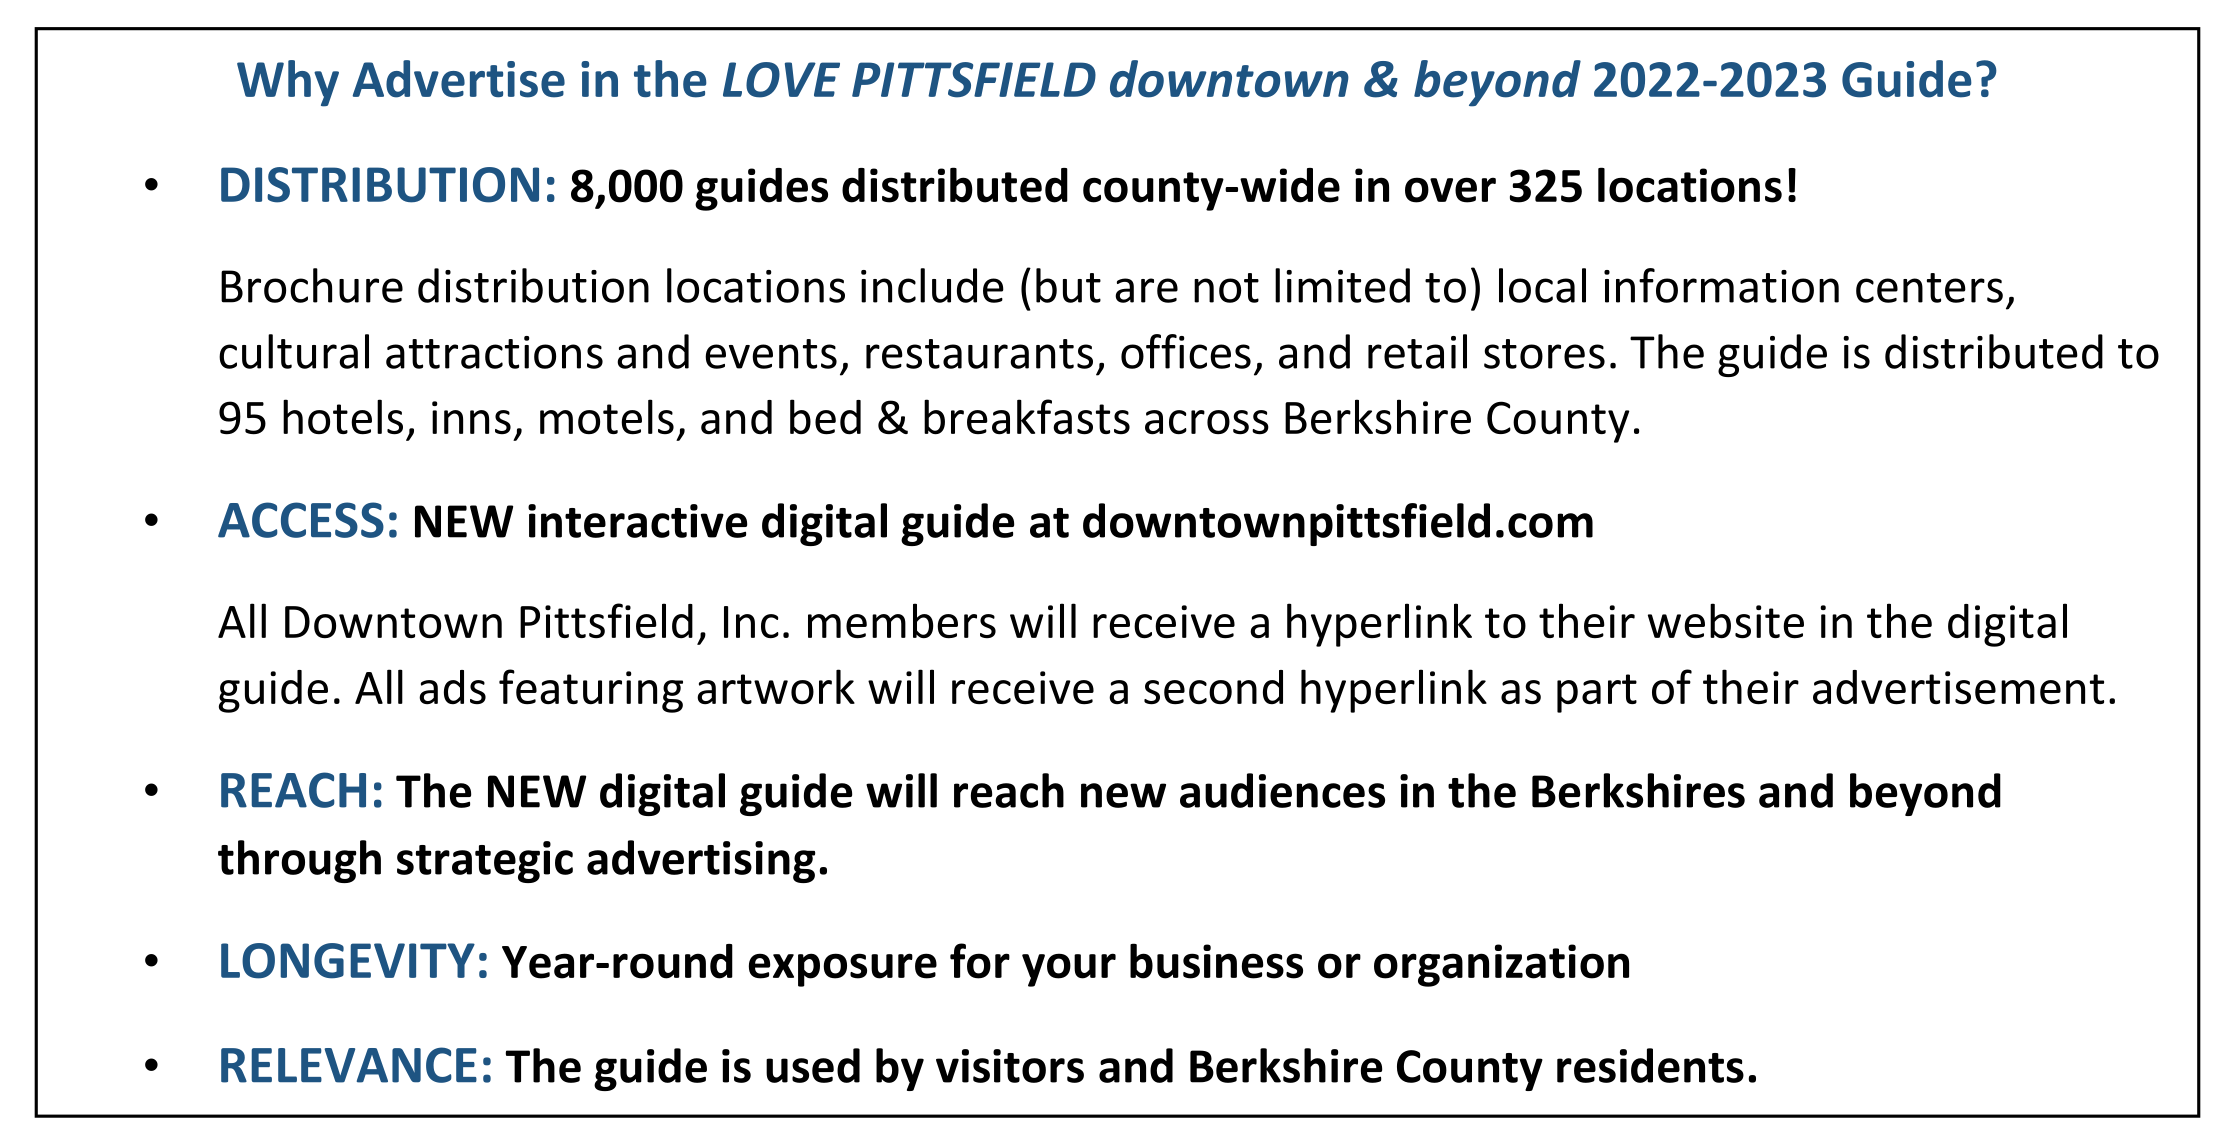 Why Advertise OVE PITTSFIELD downtown & beyond 2022-2023 Guide